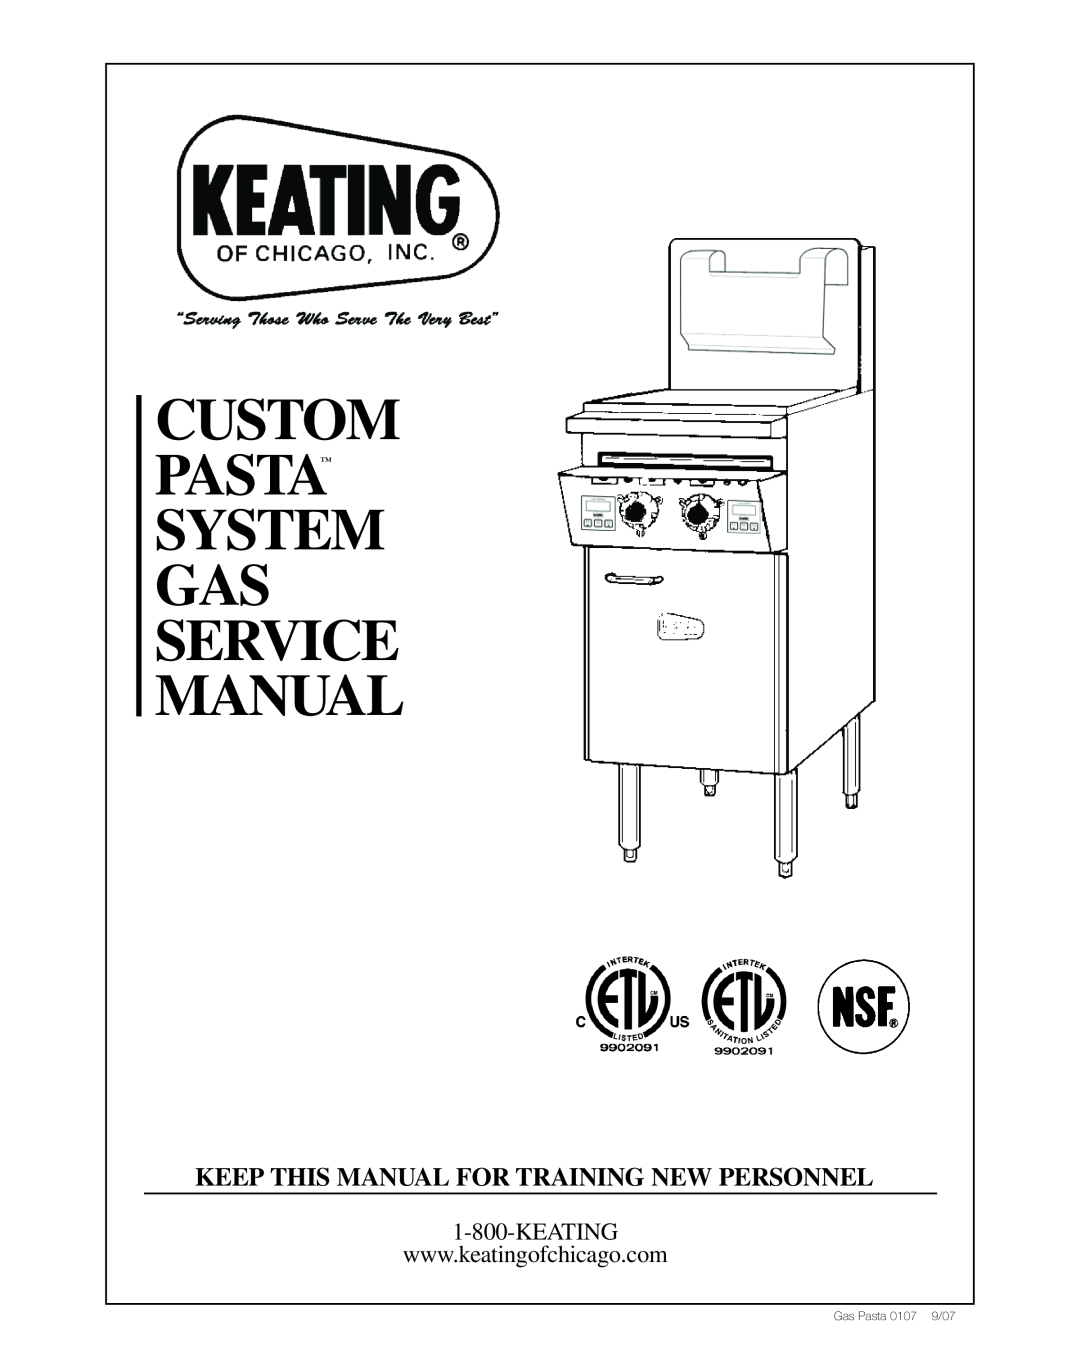 Keating Of Chicago Gas Custom Pasta System manual Keep This Manual For Training New Personnel, Keating 